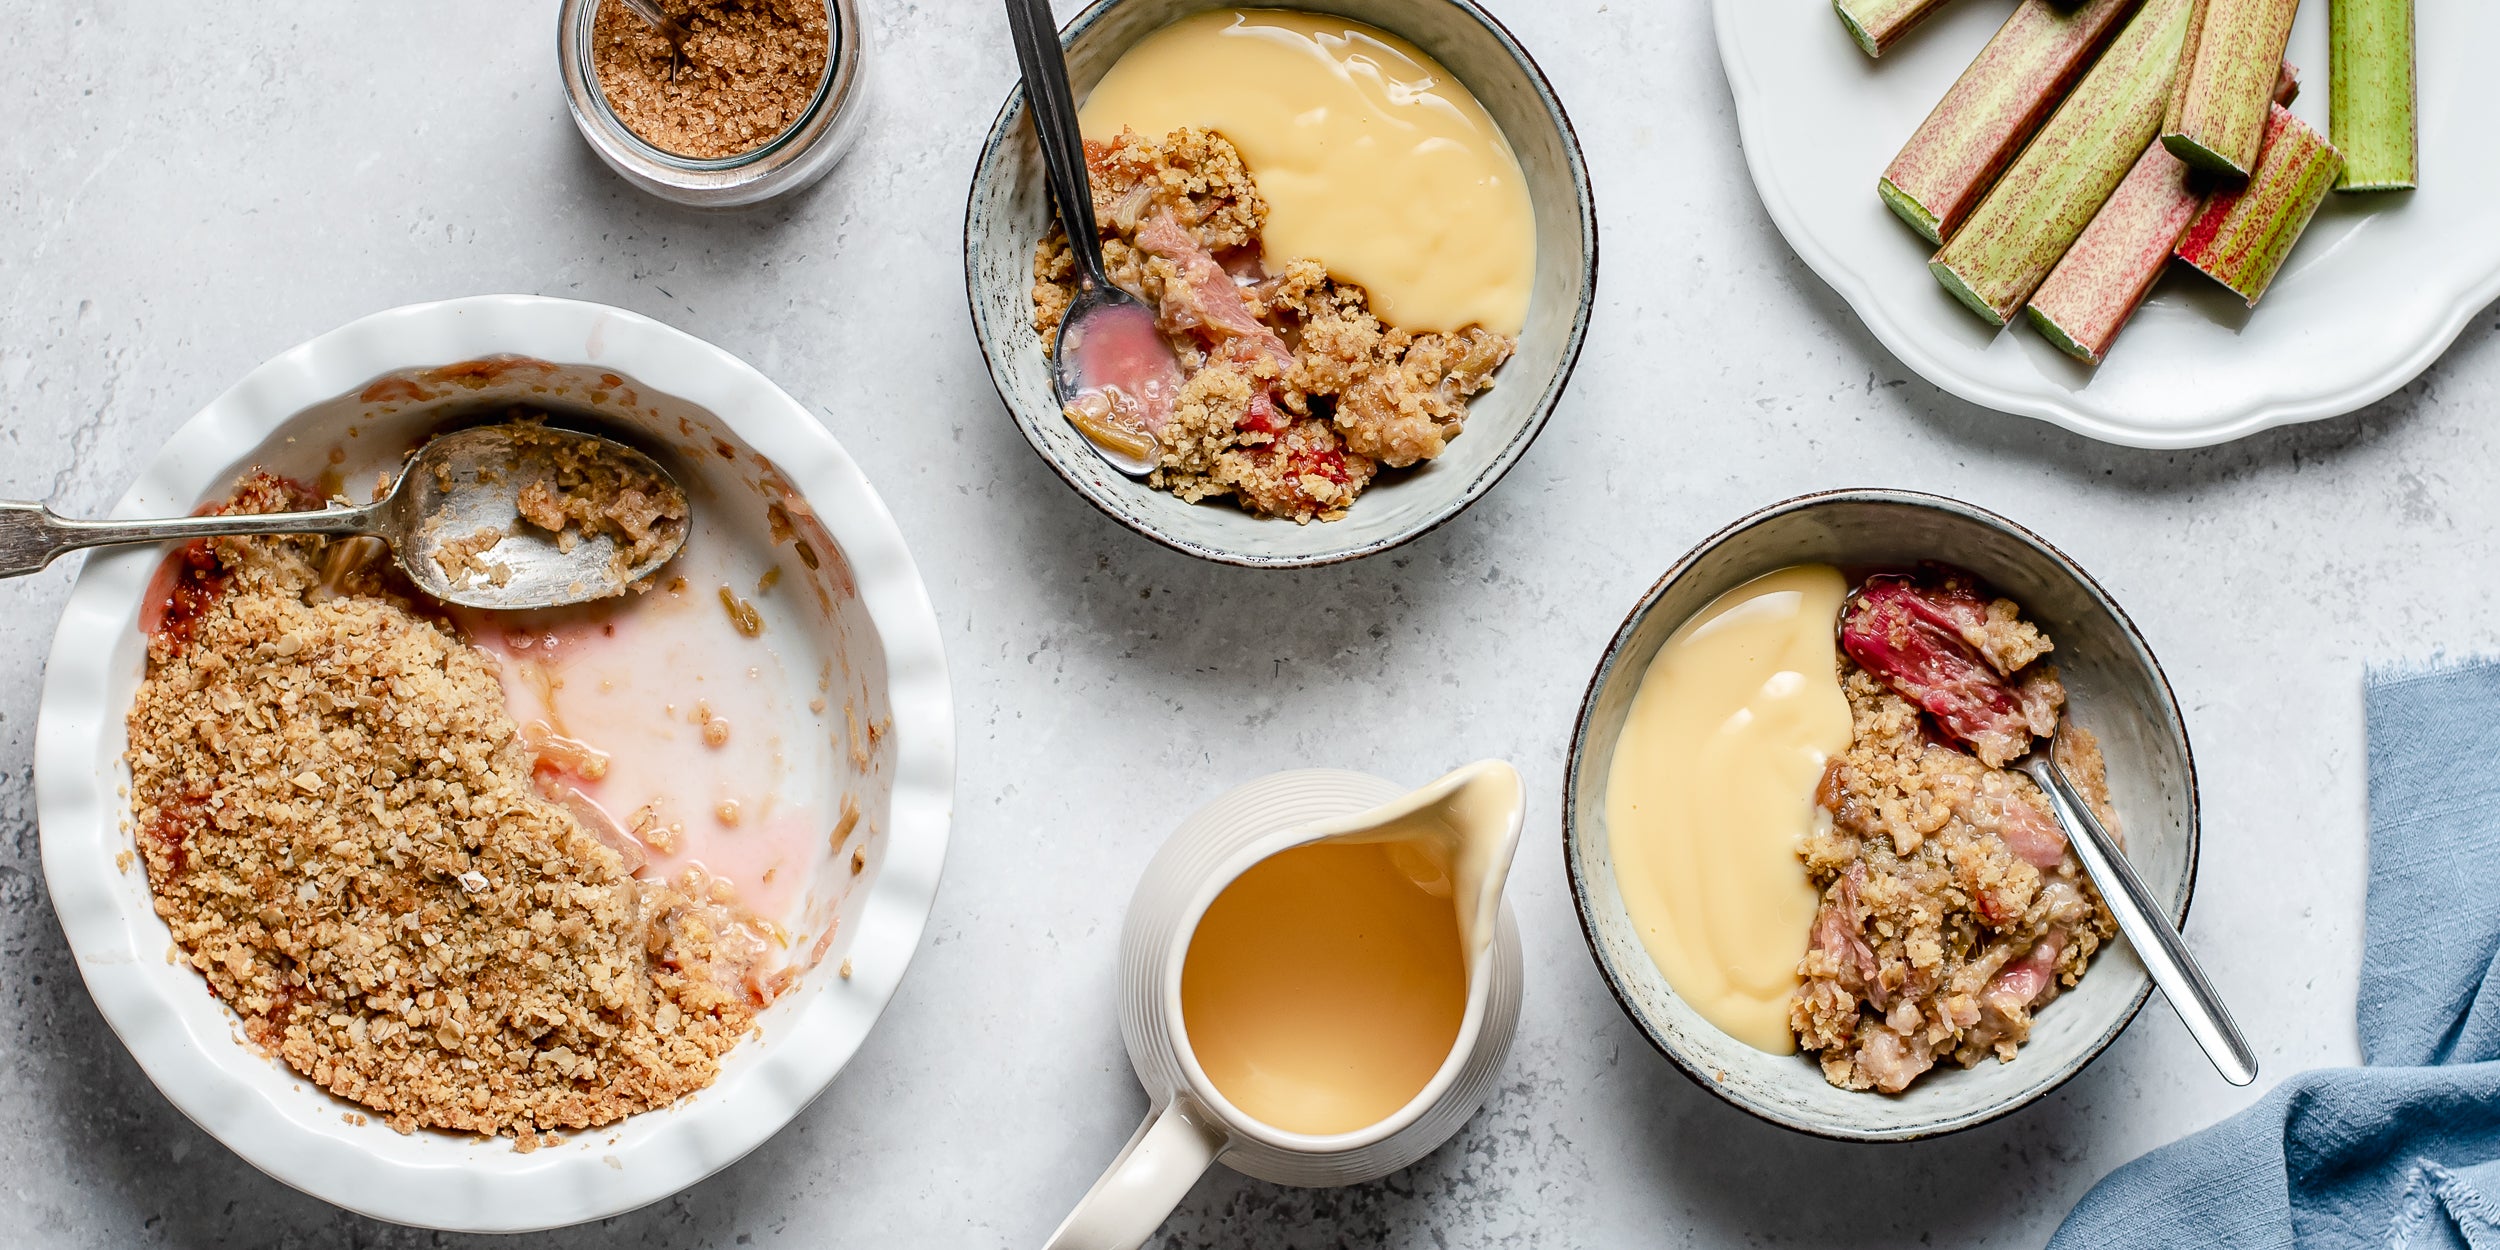 Top view of Rhubarb Crumble served in dishes with a generous dollop of vanilla custard